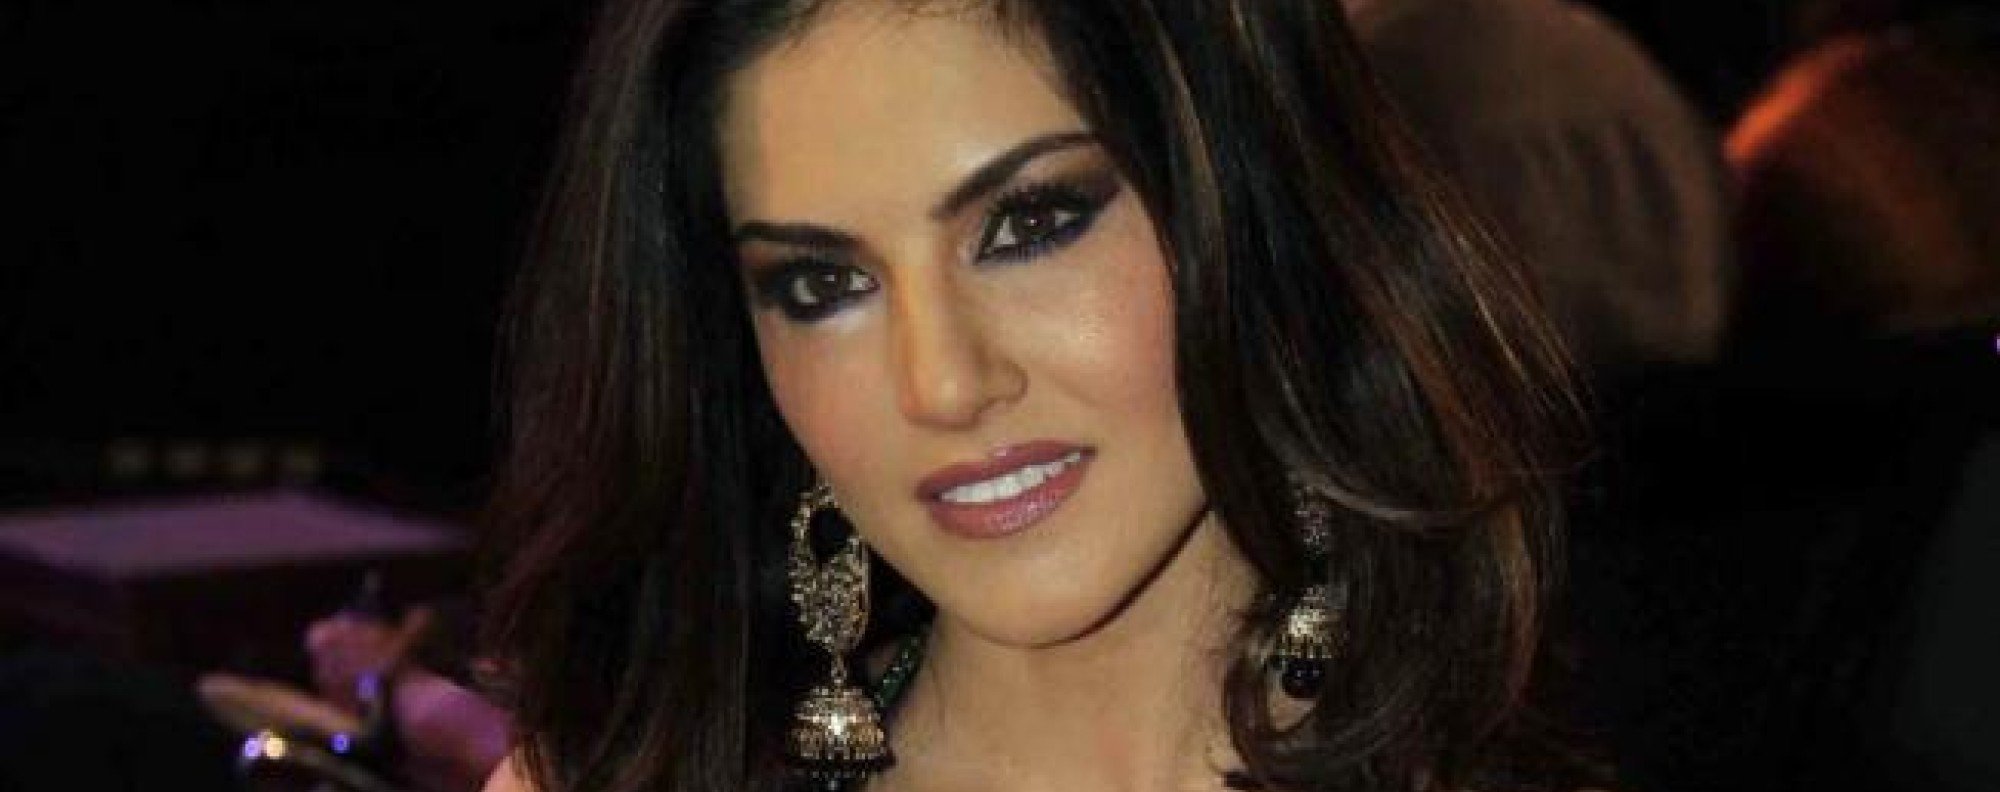 Rape crisis in India leads to calls for porn star Sunny Leone to be jailed  | South China Morning Post